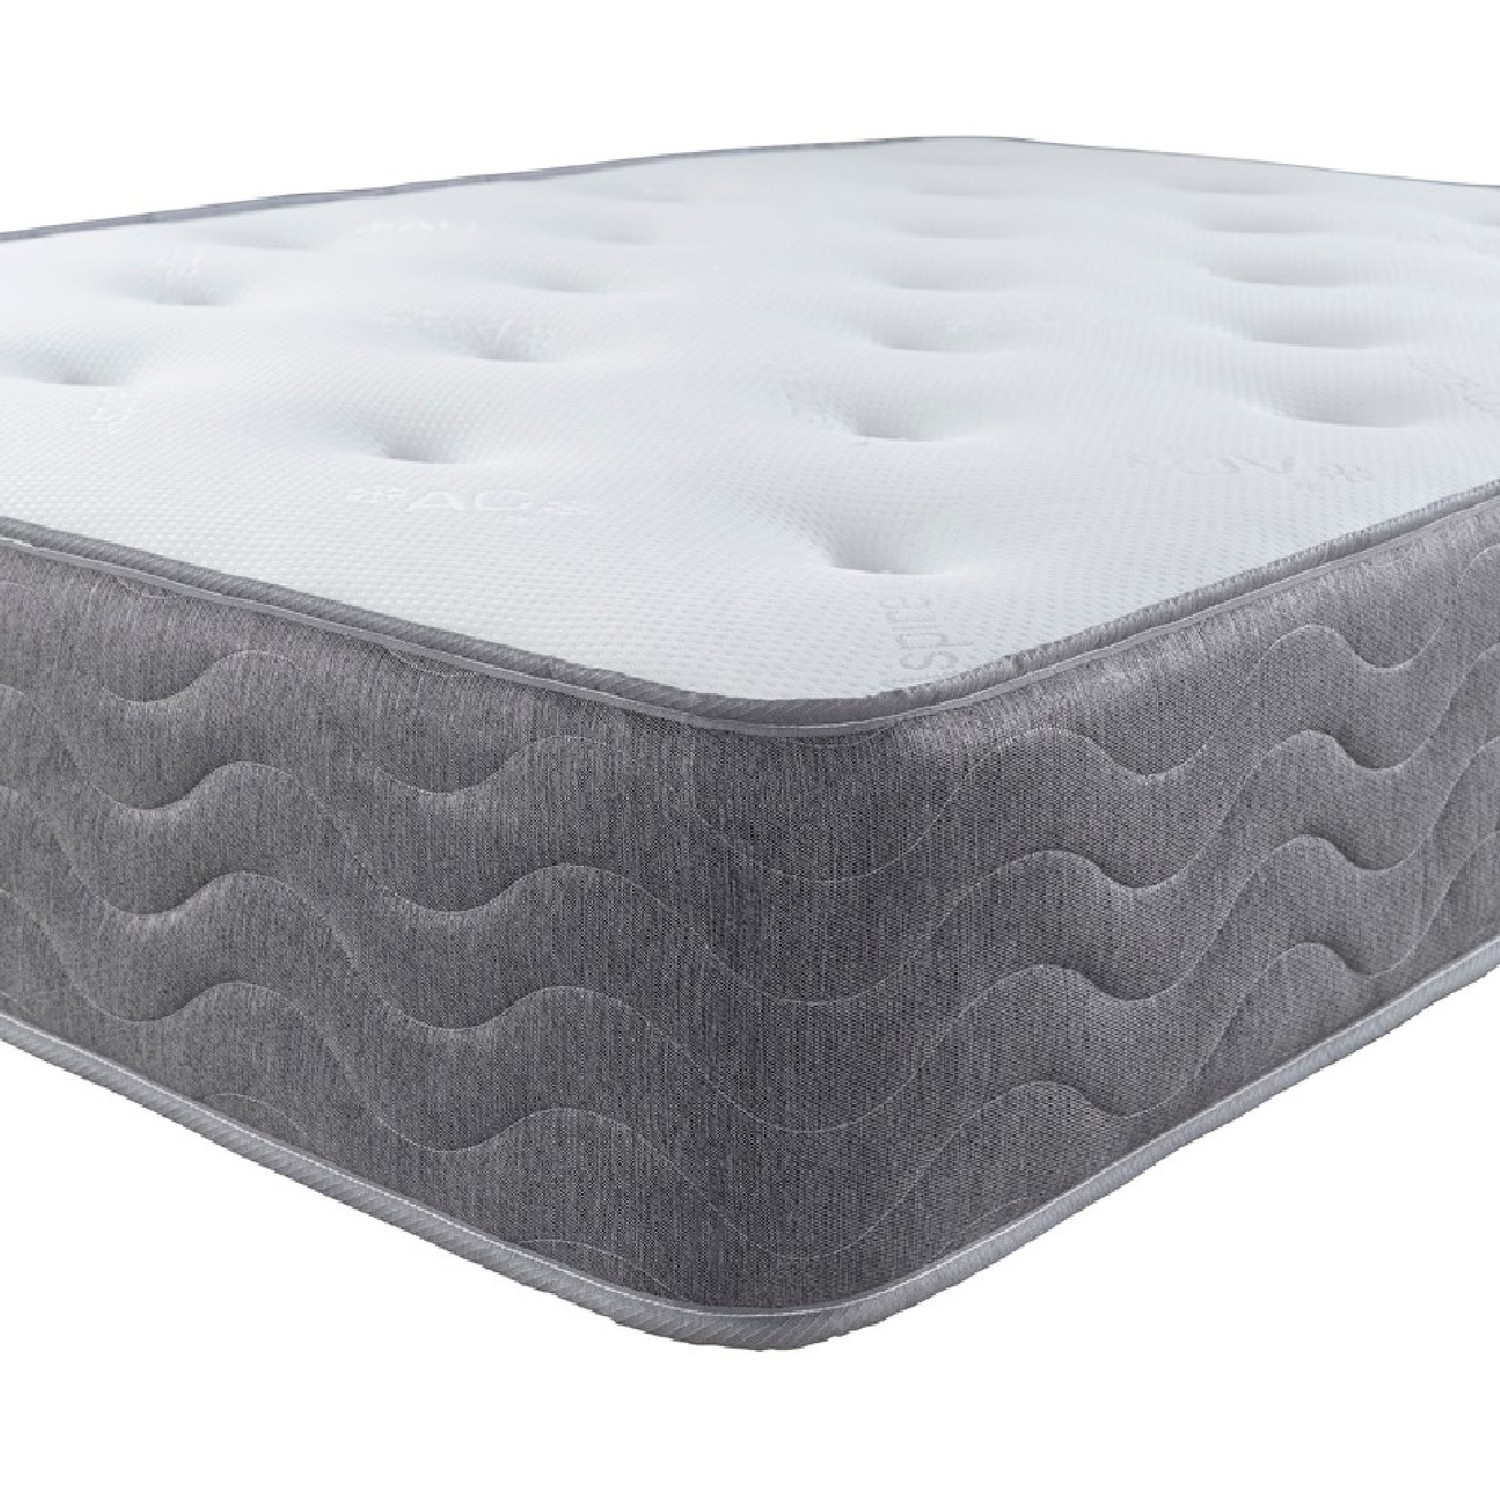 Aspire furniture air conditioned natural 1000 pocket spring mattress - small double